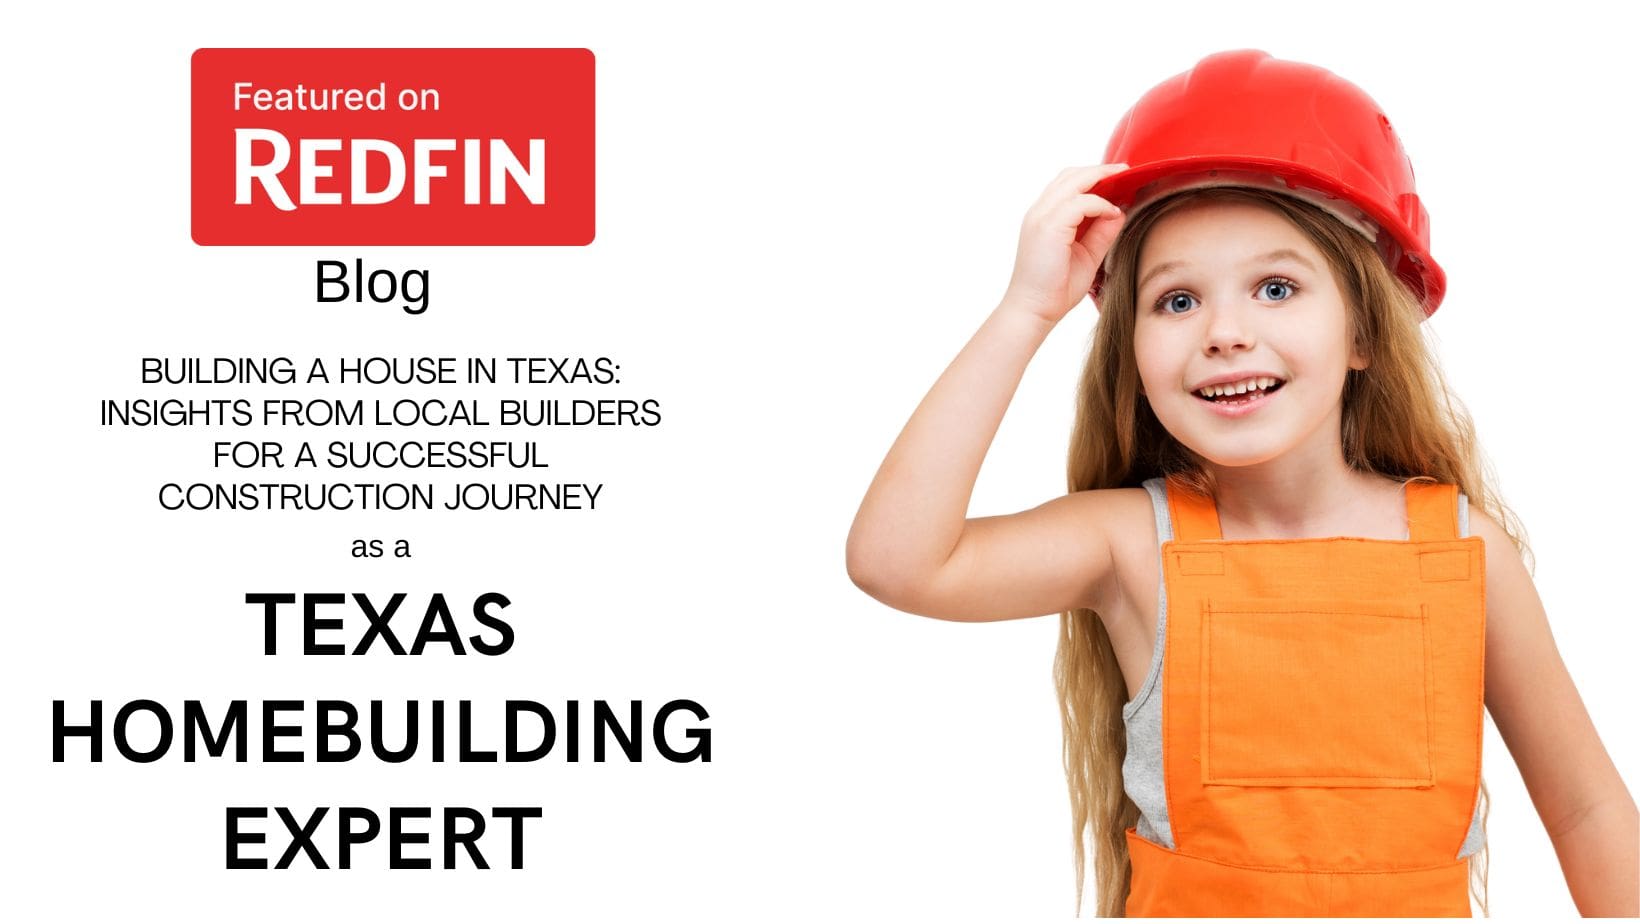 Named a New Home Expert in Texas by Redfin Blog